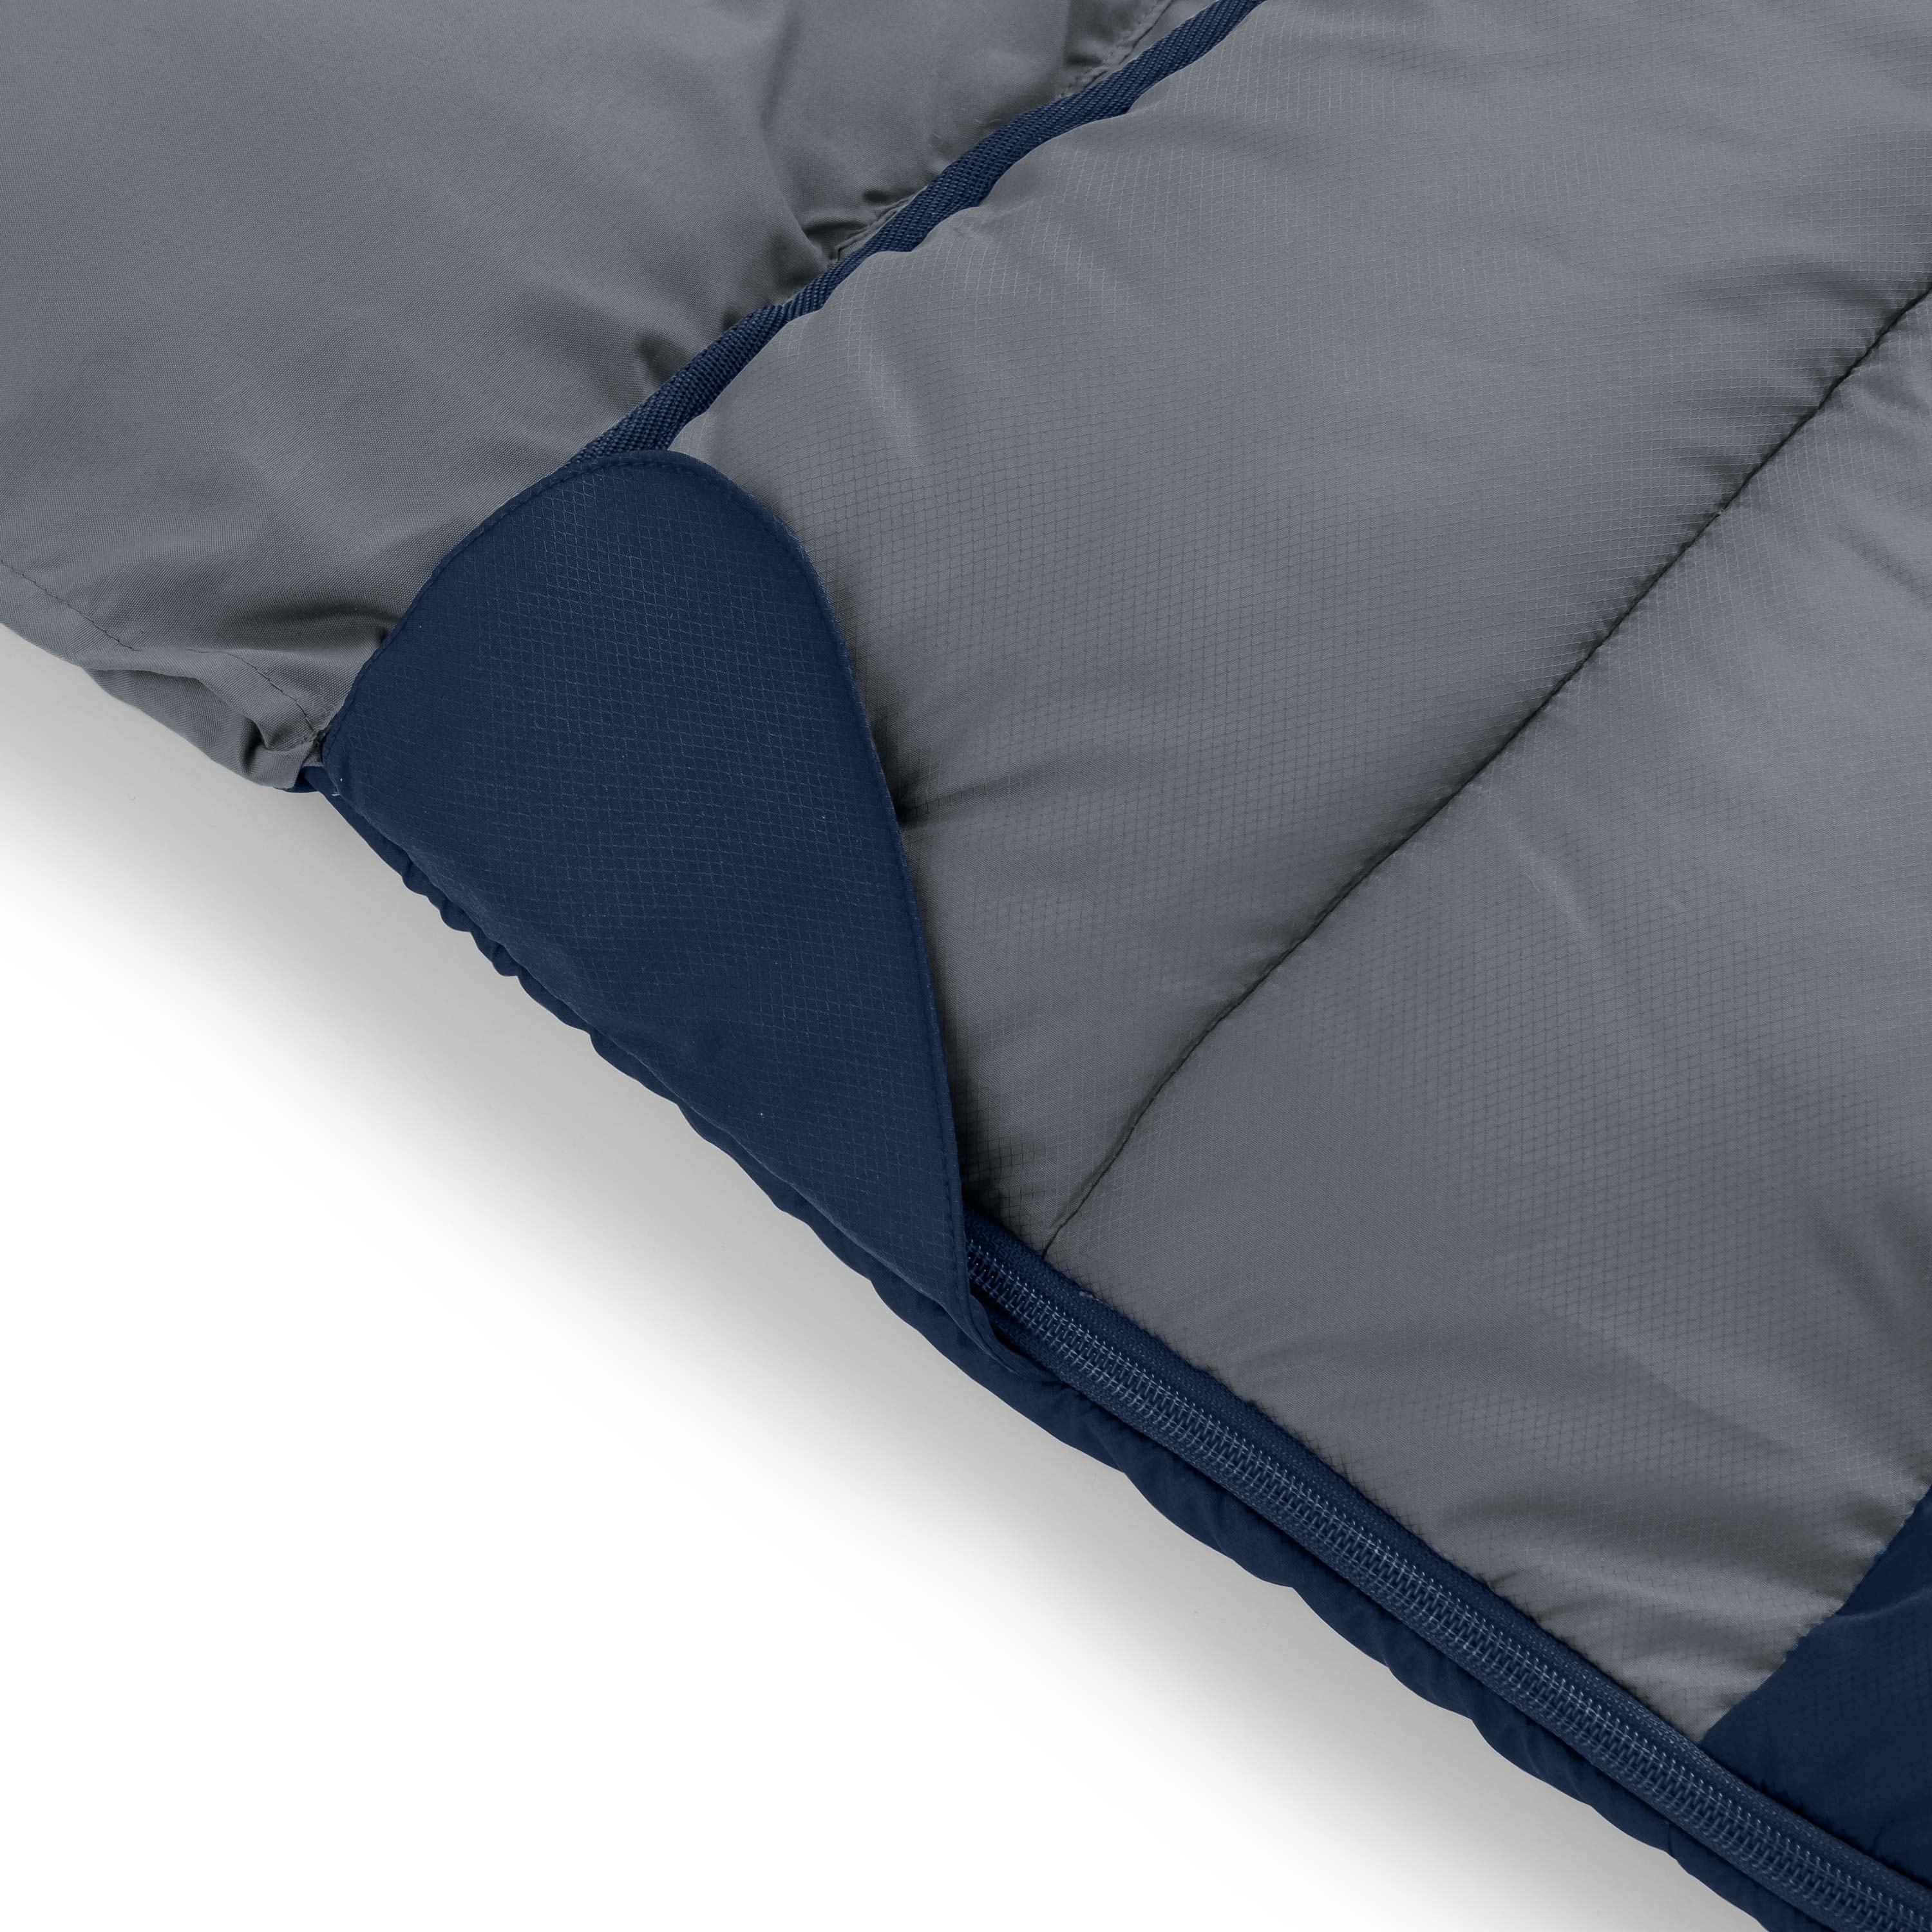 Ozark Trail 40F Weighted Adult Sleeping Bag – Navy & Gray (Size 95 in. x 34 in.) - image 5 of 12